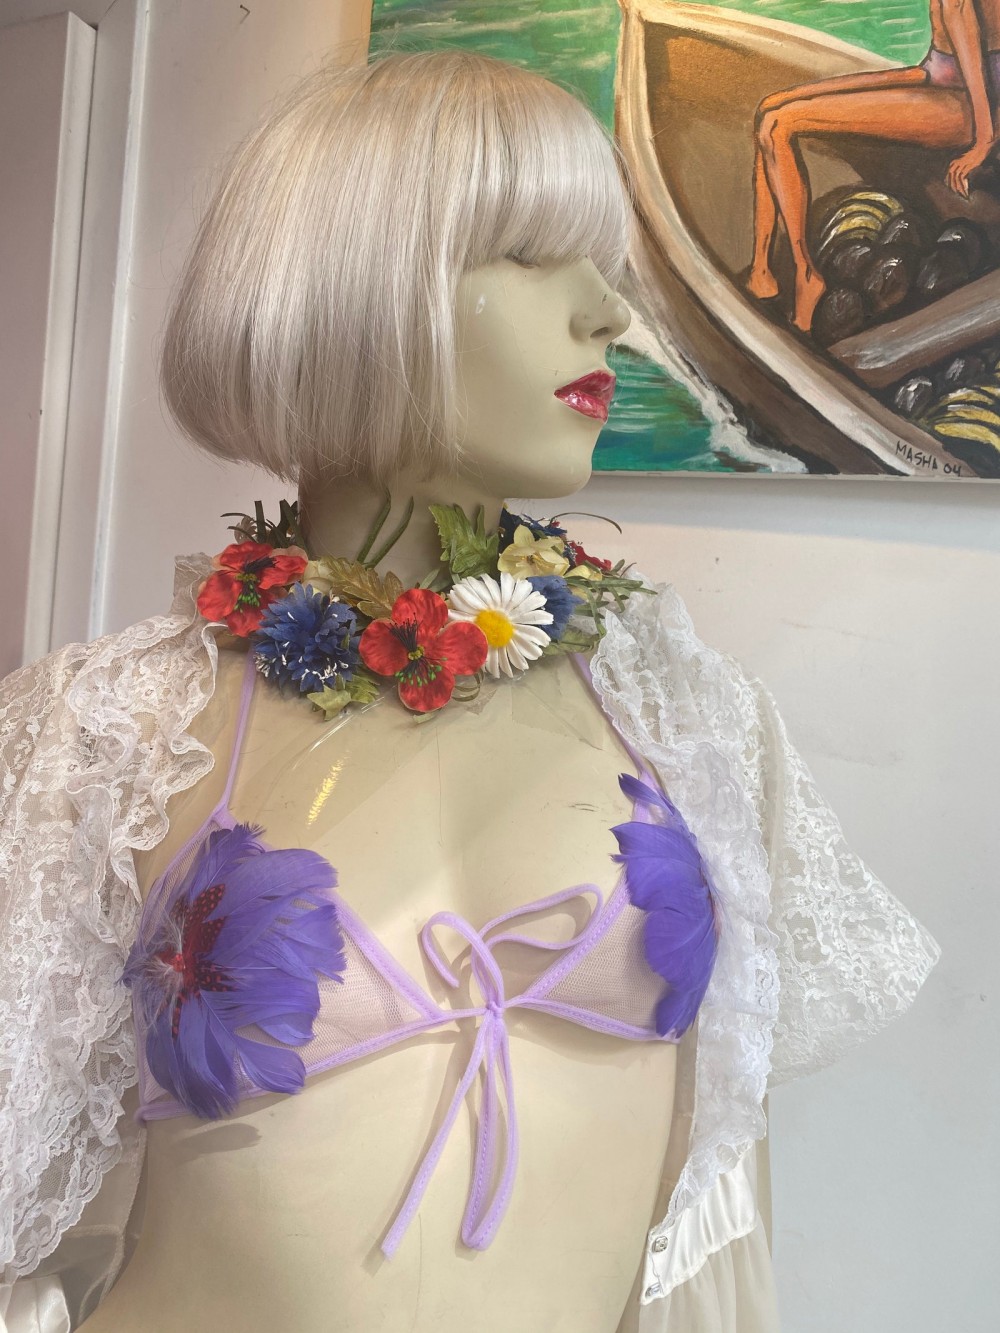 A mannequin in some saucy lingerie at Le Grand Strip.nbsp